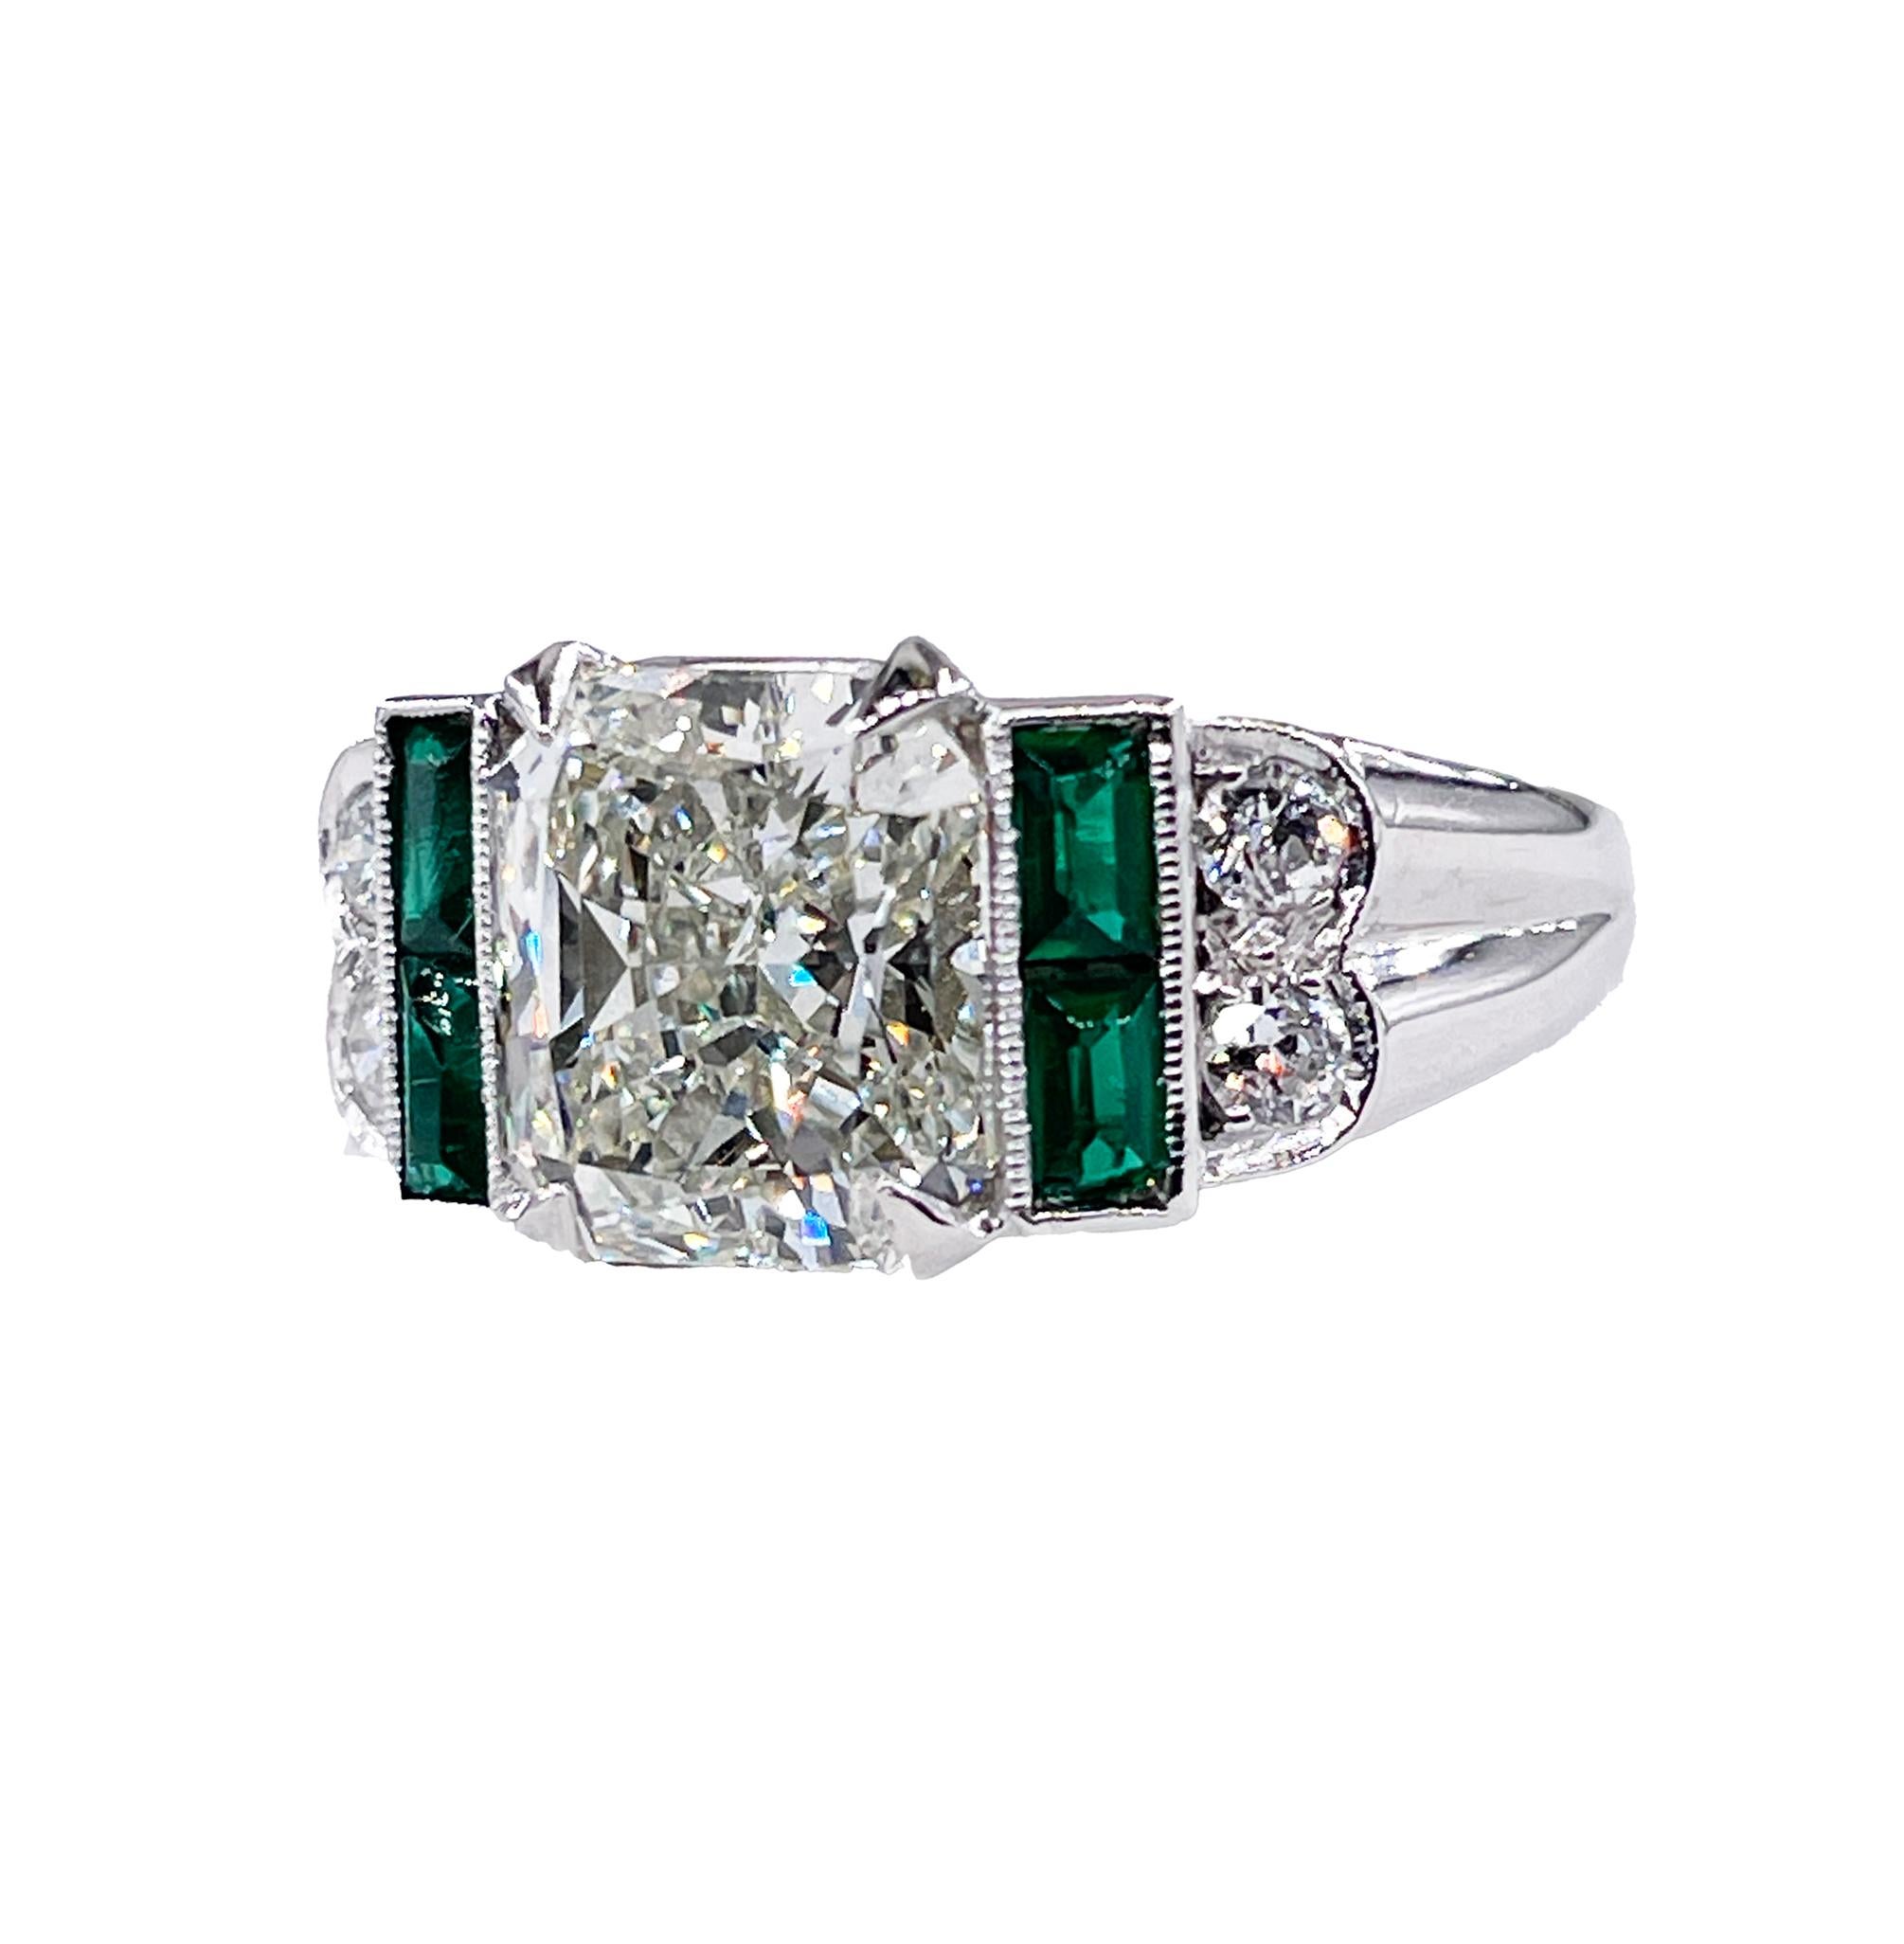 Art Deco Style Vintage GIA 3.77ctw Radiant cut Diamond & Green EMERALDs Platinum Ring, Circa 1980s

Inspired by Art Deco jewelry, colorful, bold and elaborate Diamond Ring from 1980s. The 'Era of Excess', when bold and daring fashion, colorful